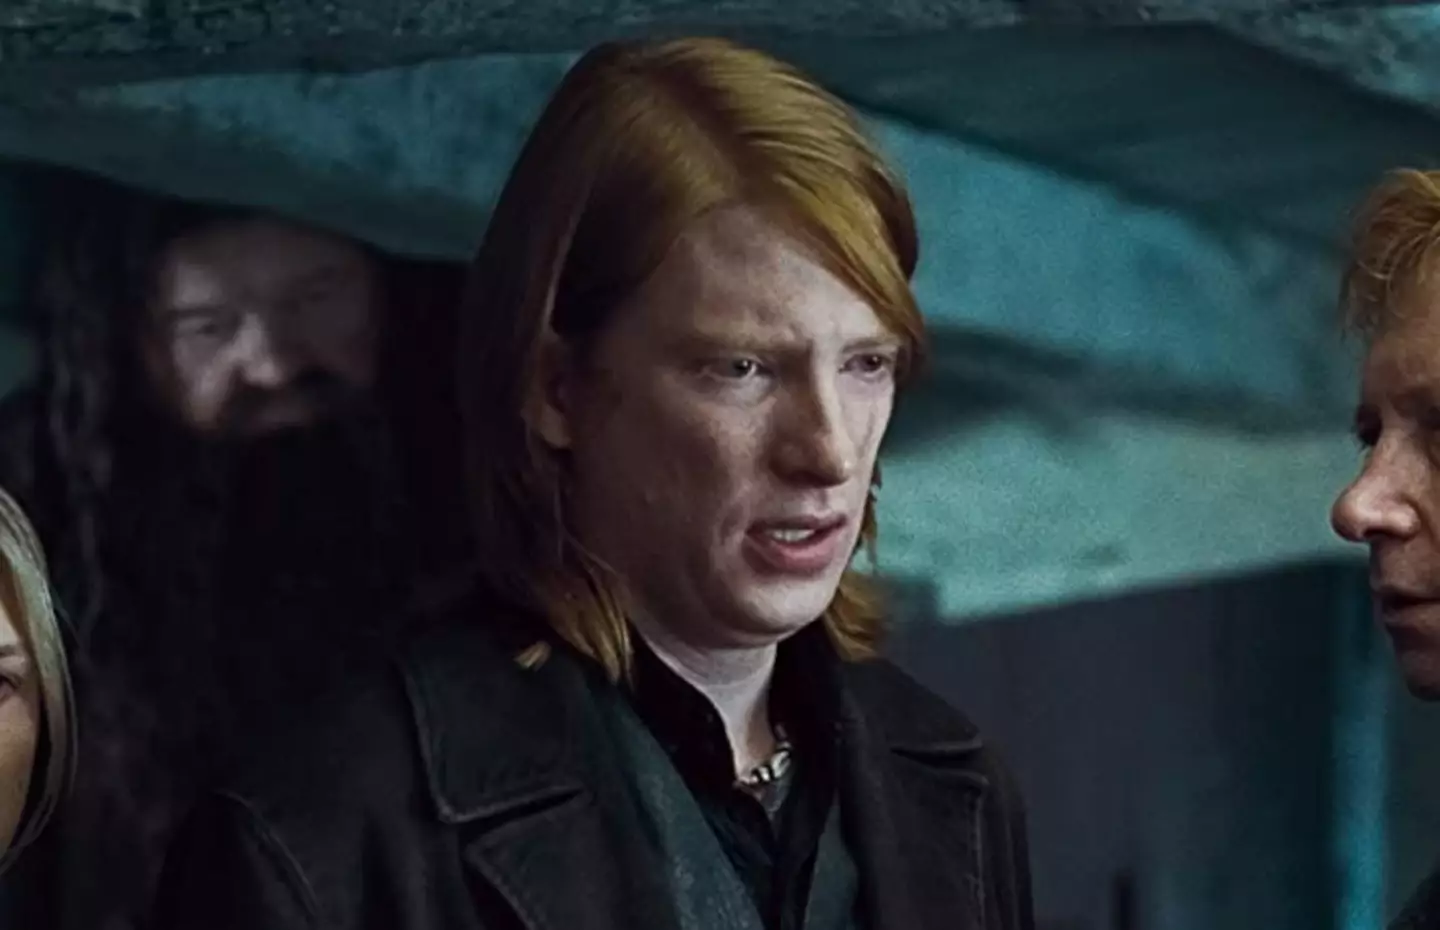 Domnhall Gleeson took on the role of Bill Weasley.